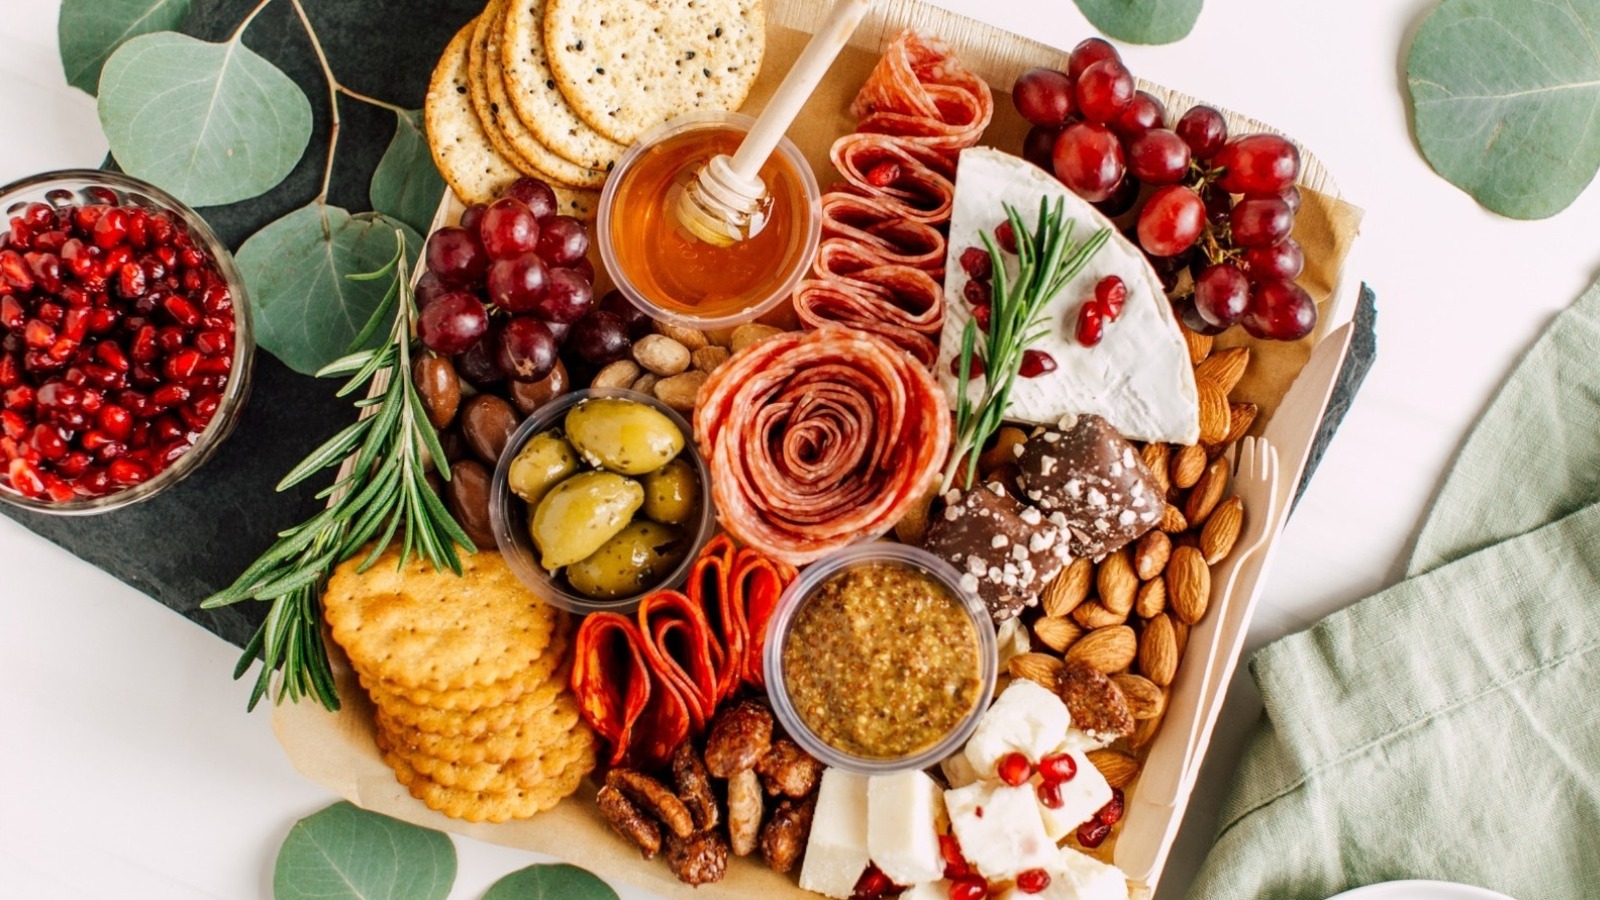 How to Make a Snackle Box Traveling Charcuterie Board!